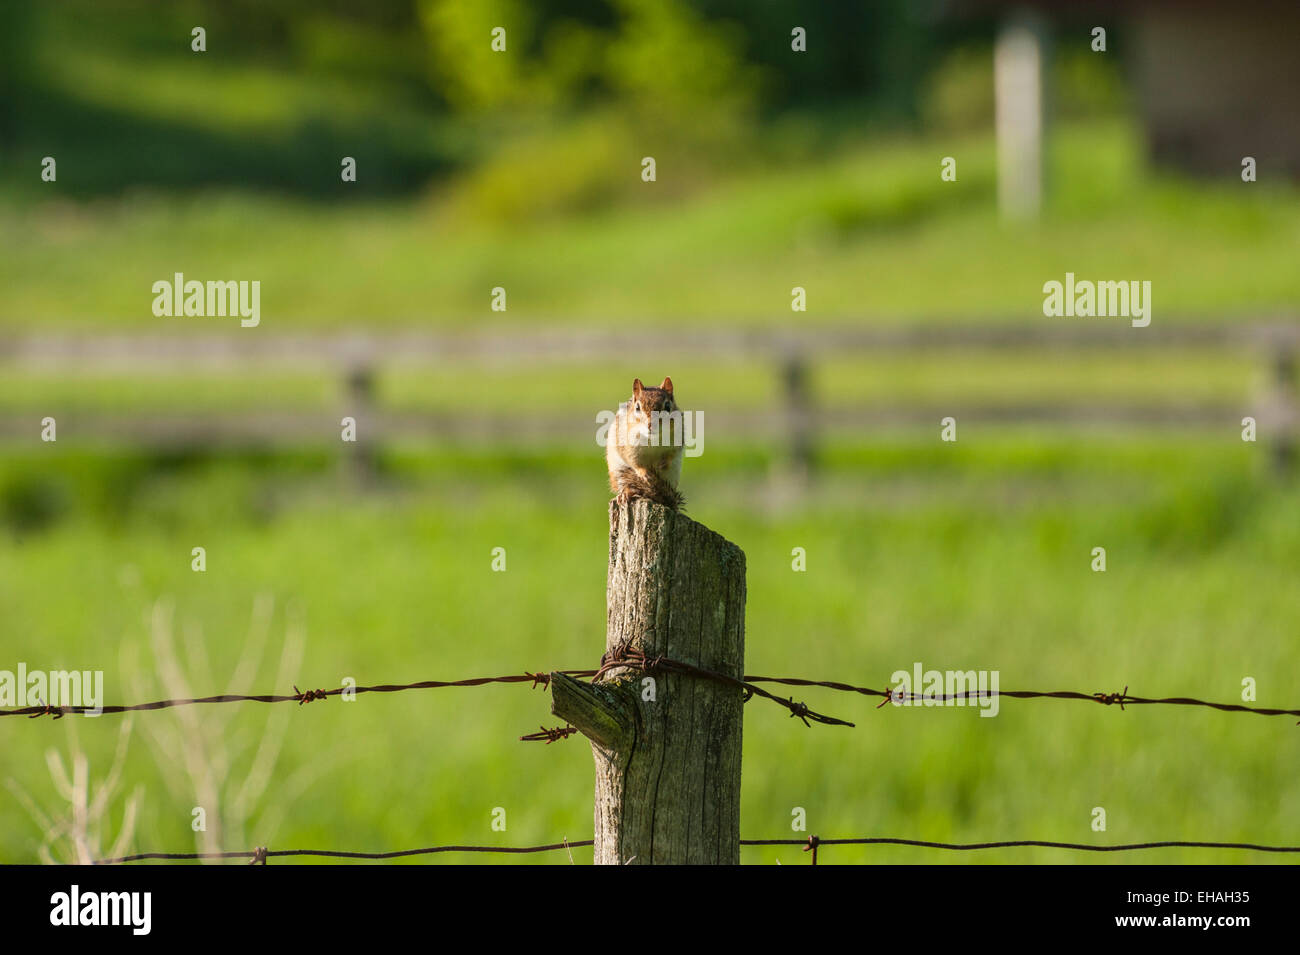 A red squirrel sits on a fence post against a background of green grass and pasture behind, Ontario, Canada. Stock Photo